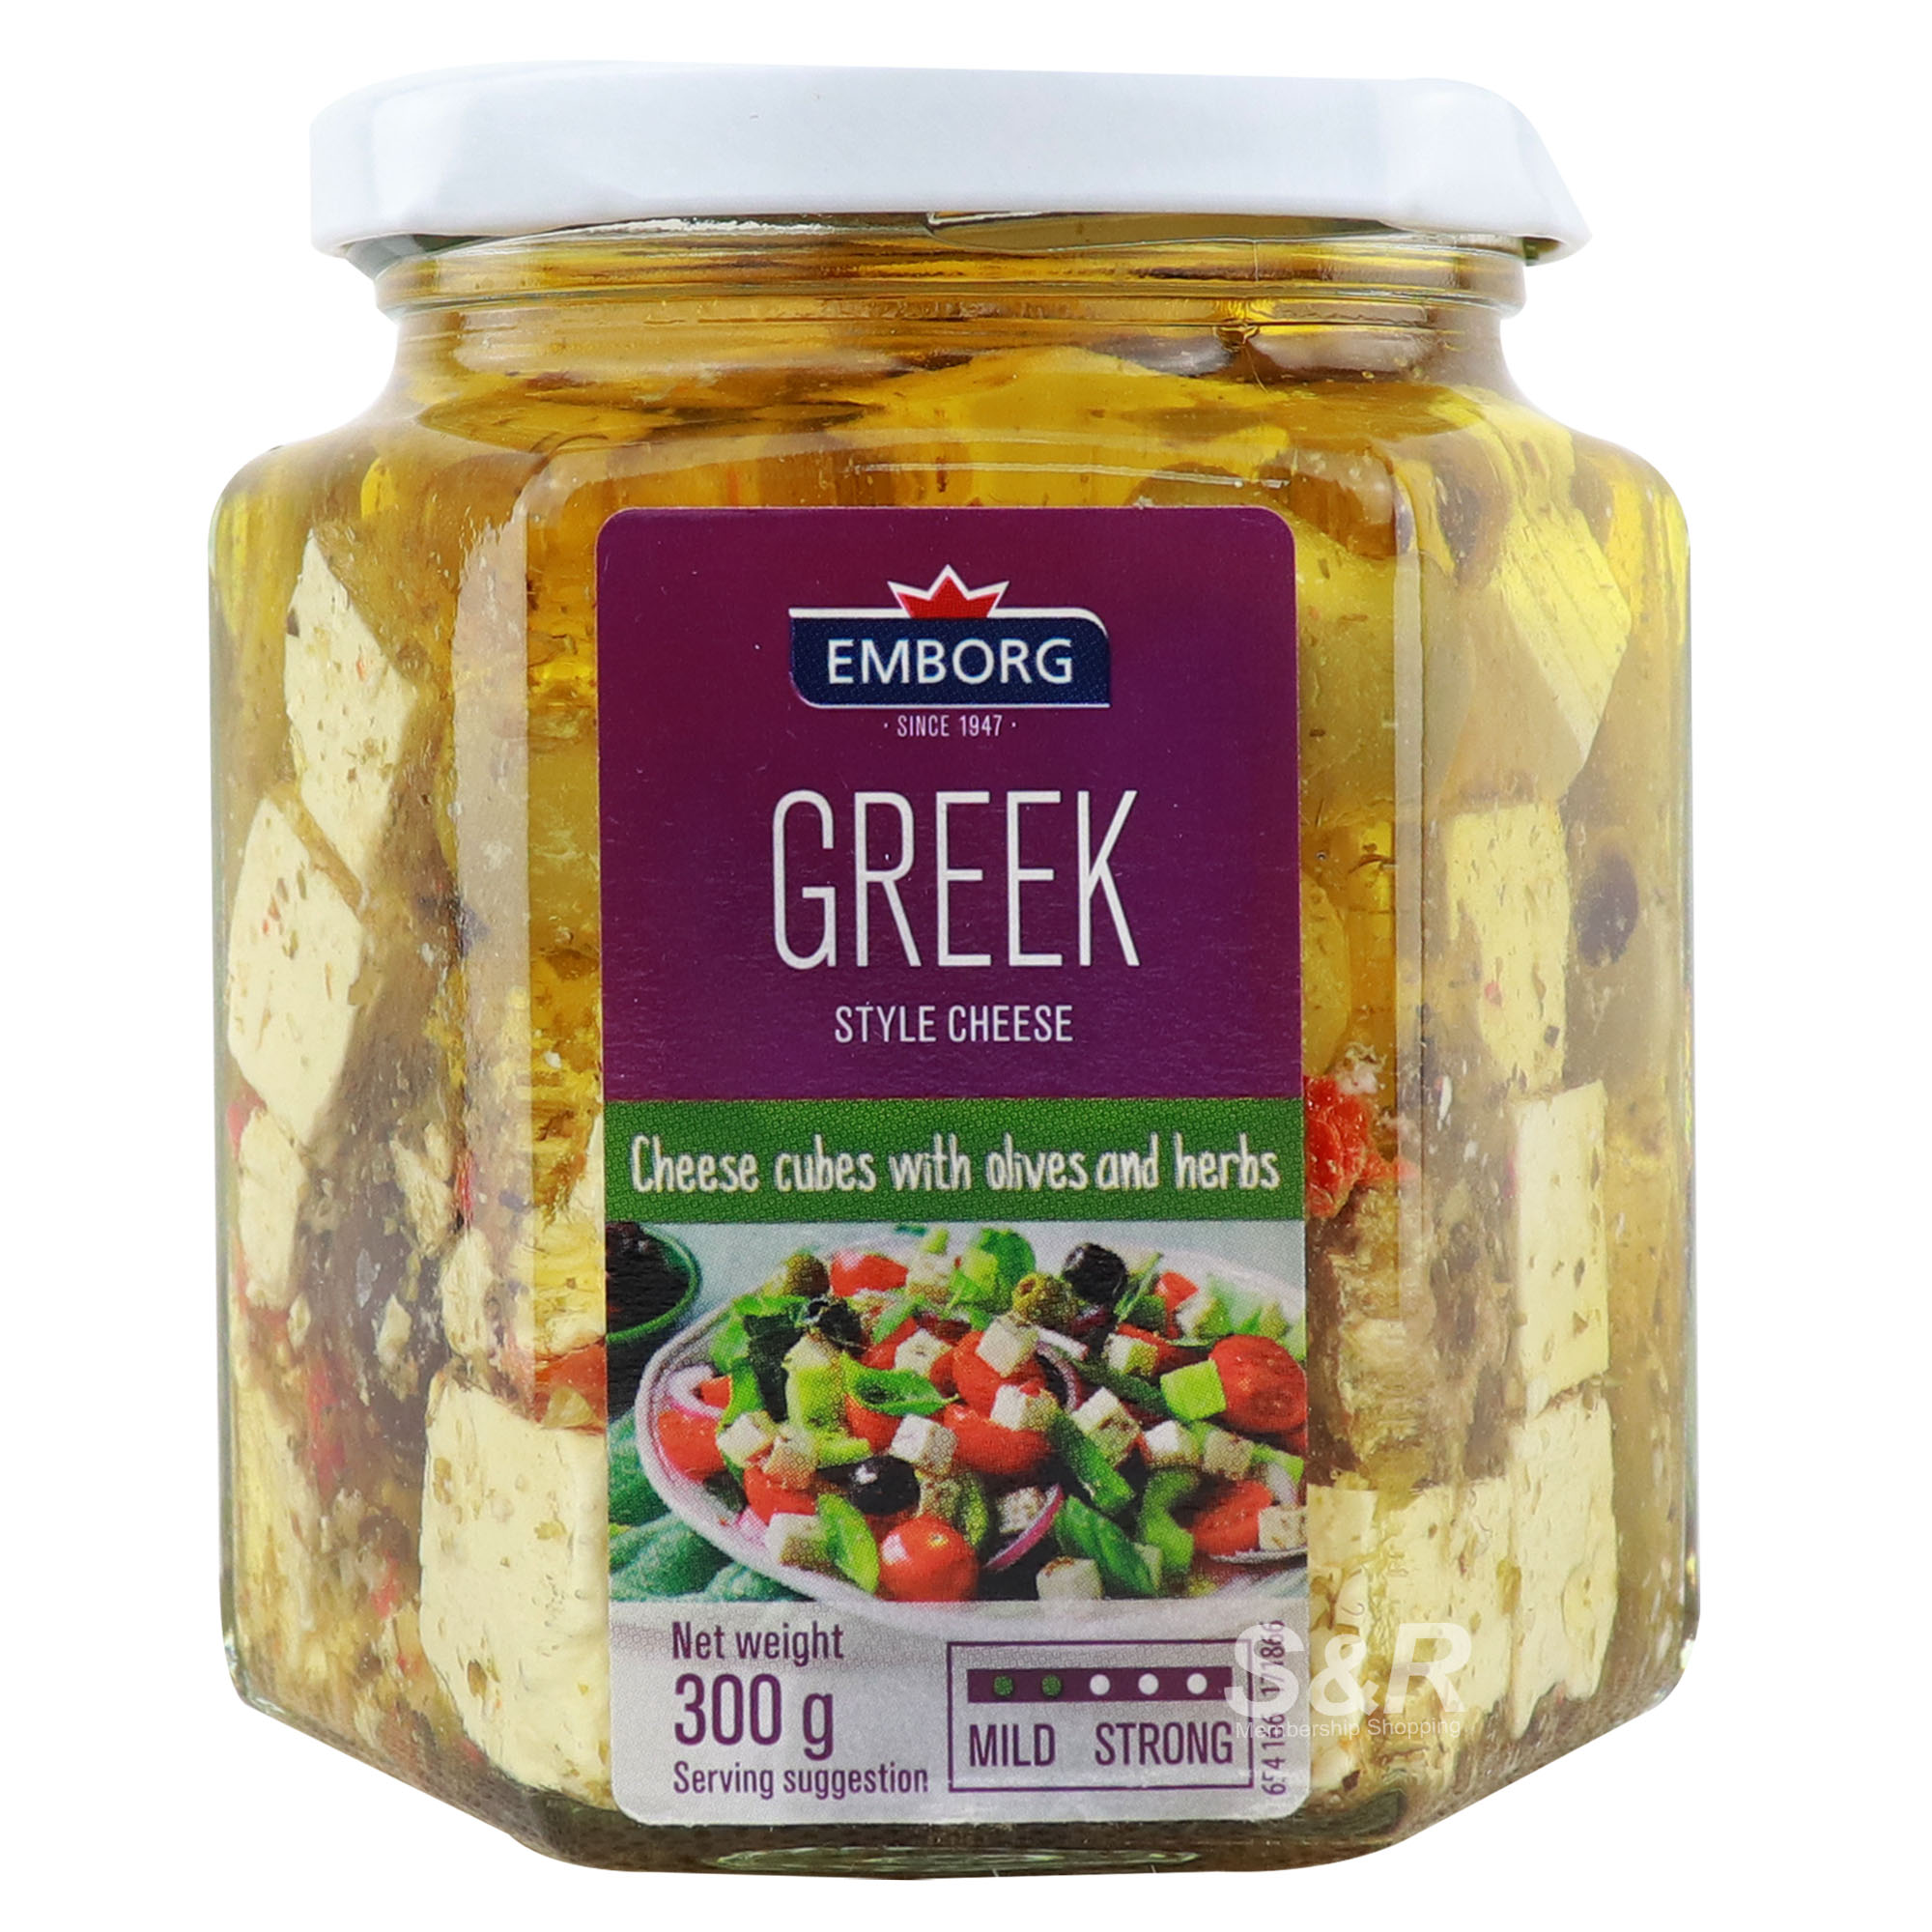 Emborg Greek Style Cheese Cubes with Olives and Herbs 300g